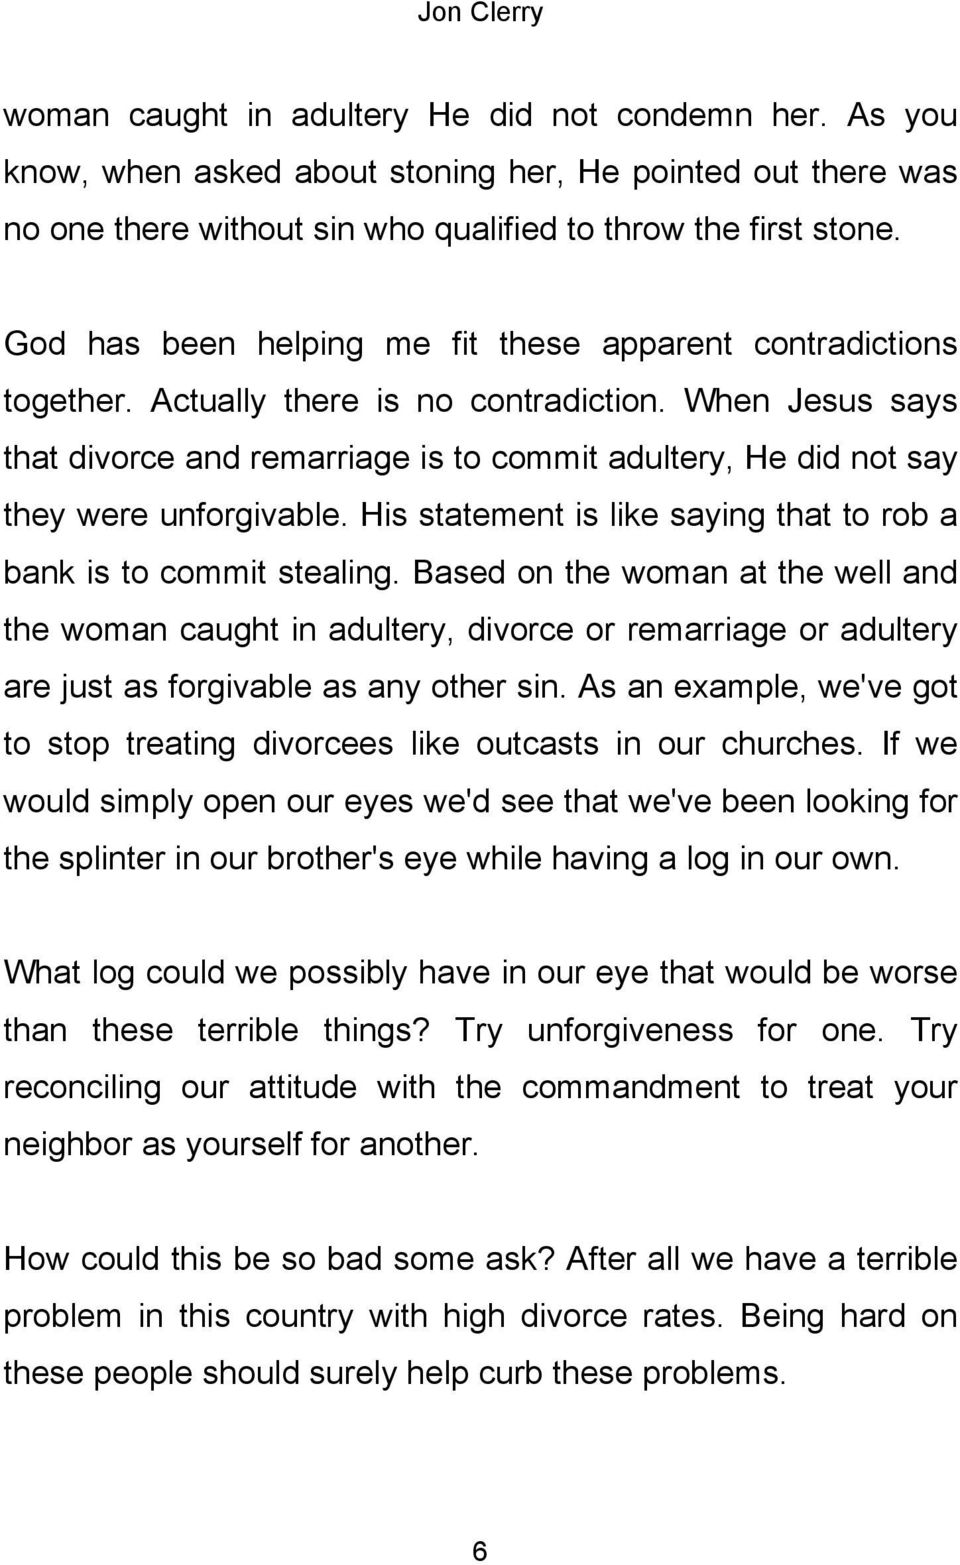 When Jesus says that divorce and remarriage is to commit adultery, He did not say they were unforgivable. His statement is like saying that to rob a bank is to commit stealing.